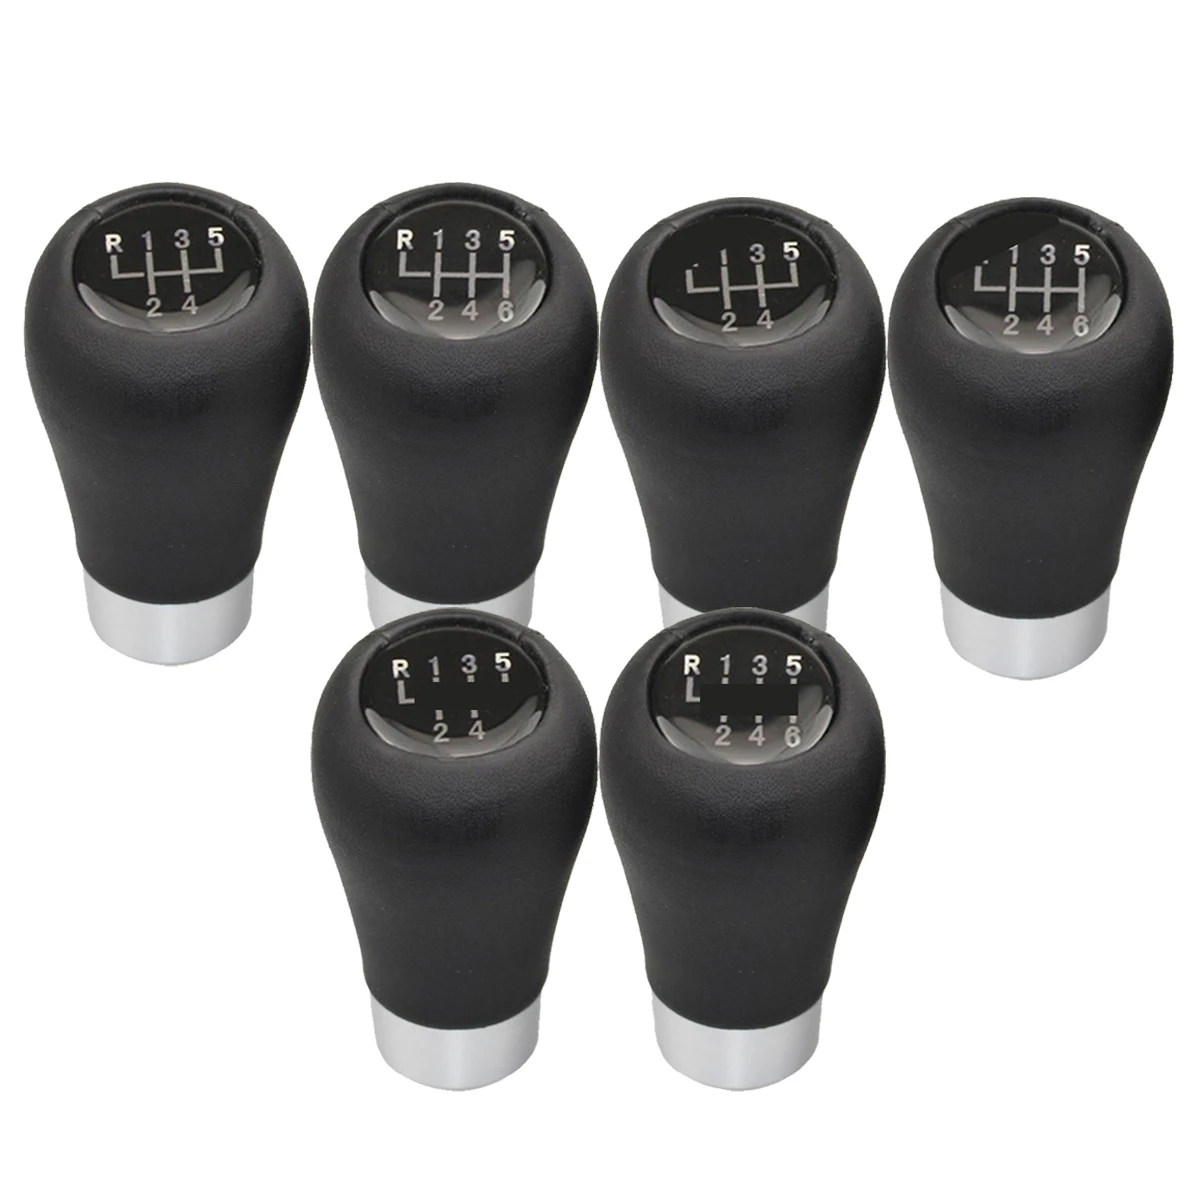 5 6 Speed Gear Shift Knob Auto Shifter Lever For BMW 1 3 5 6 Series E39 E46 E53 E60 E61 E63 E81 E82 E83 E87 E90 E91 E92 X1 X3 X5